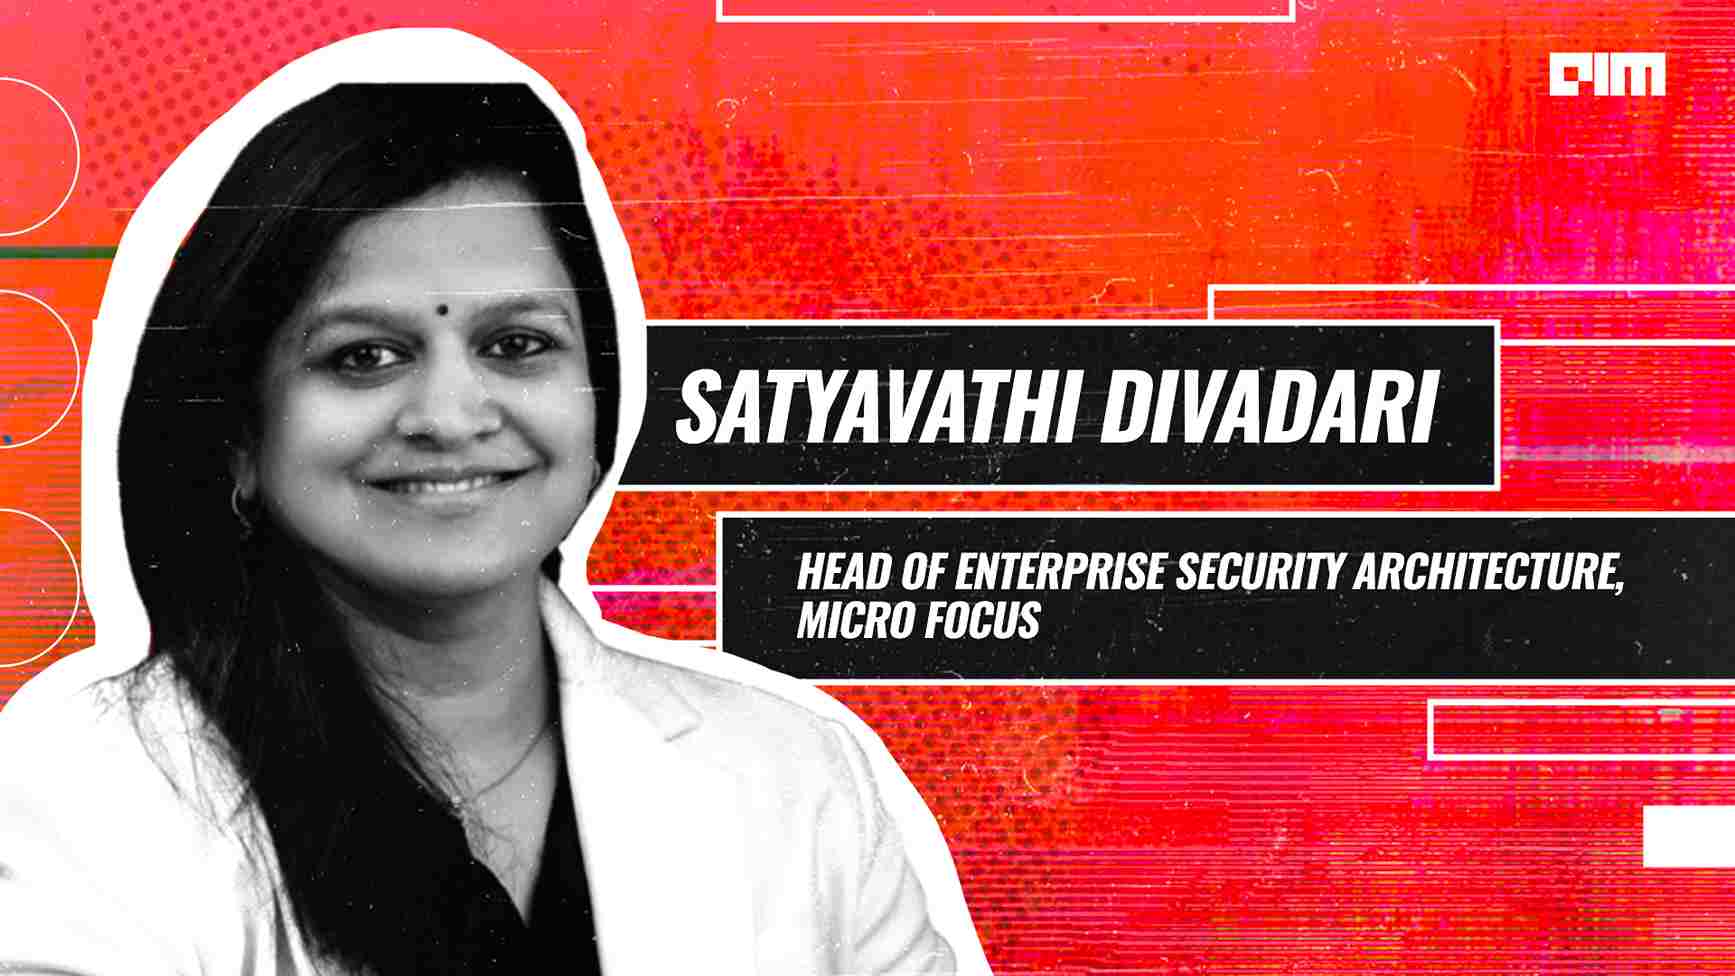 Women need to talk about their achievements in a louder voice: Satyavathi Divadari, Head of Enterprise Security Architecture, Micro Focus